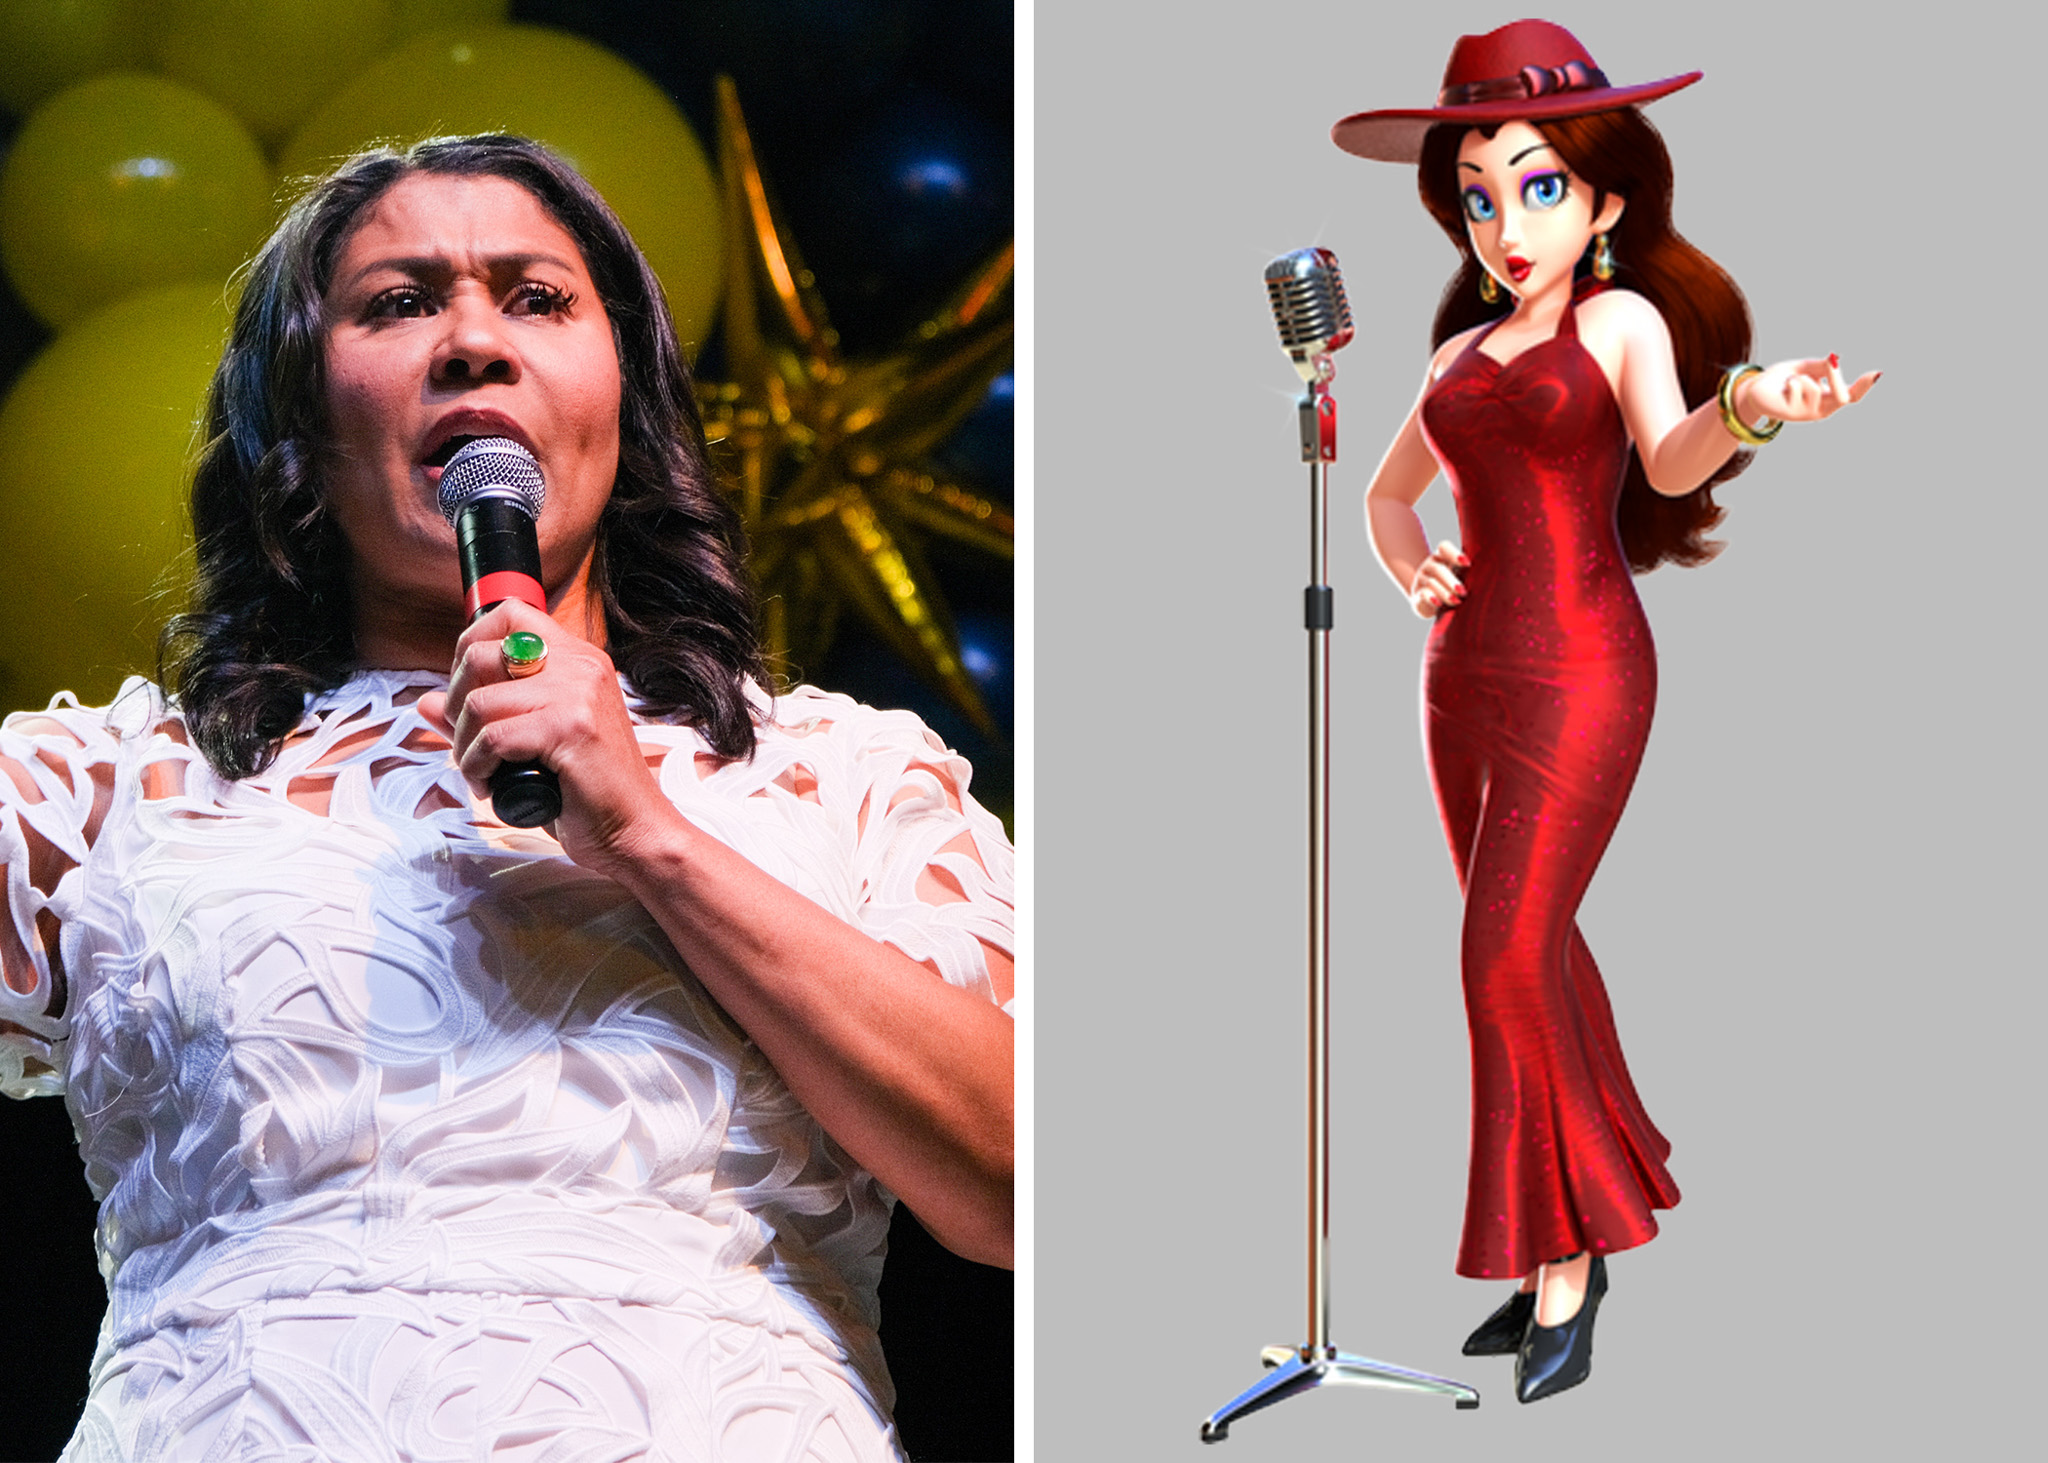 The image shows a split view: on the left, a woman in a white dress speaks into a microphone, with yellow balloons in the background. On the right, a woman in a red dress and hat stands next to a vintage microphone.